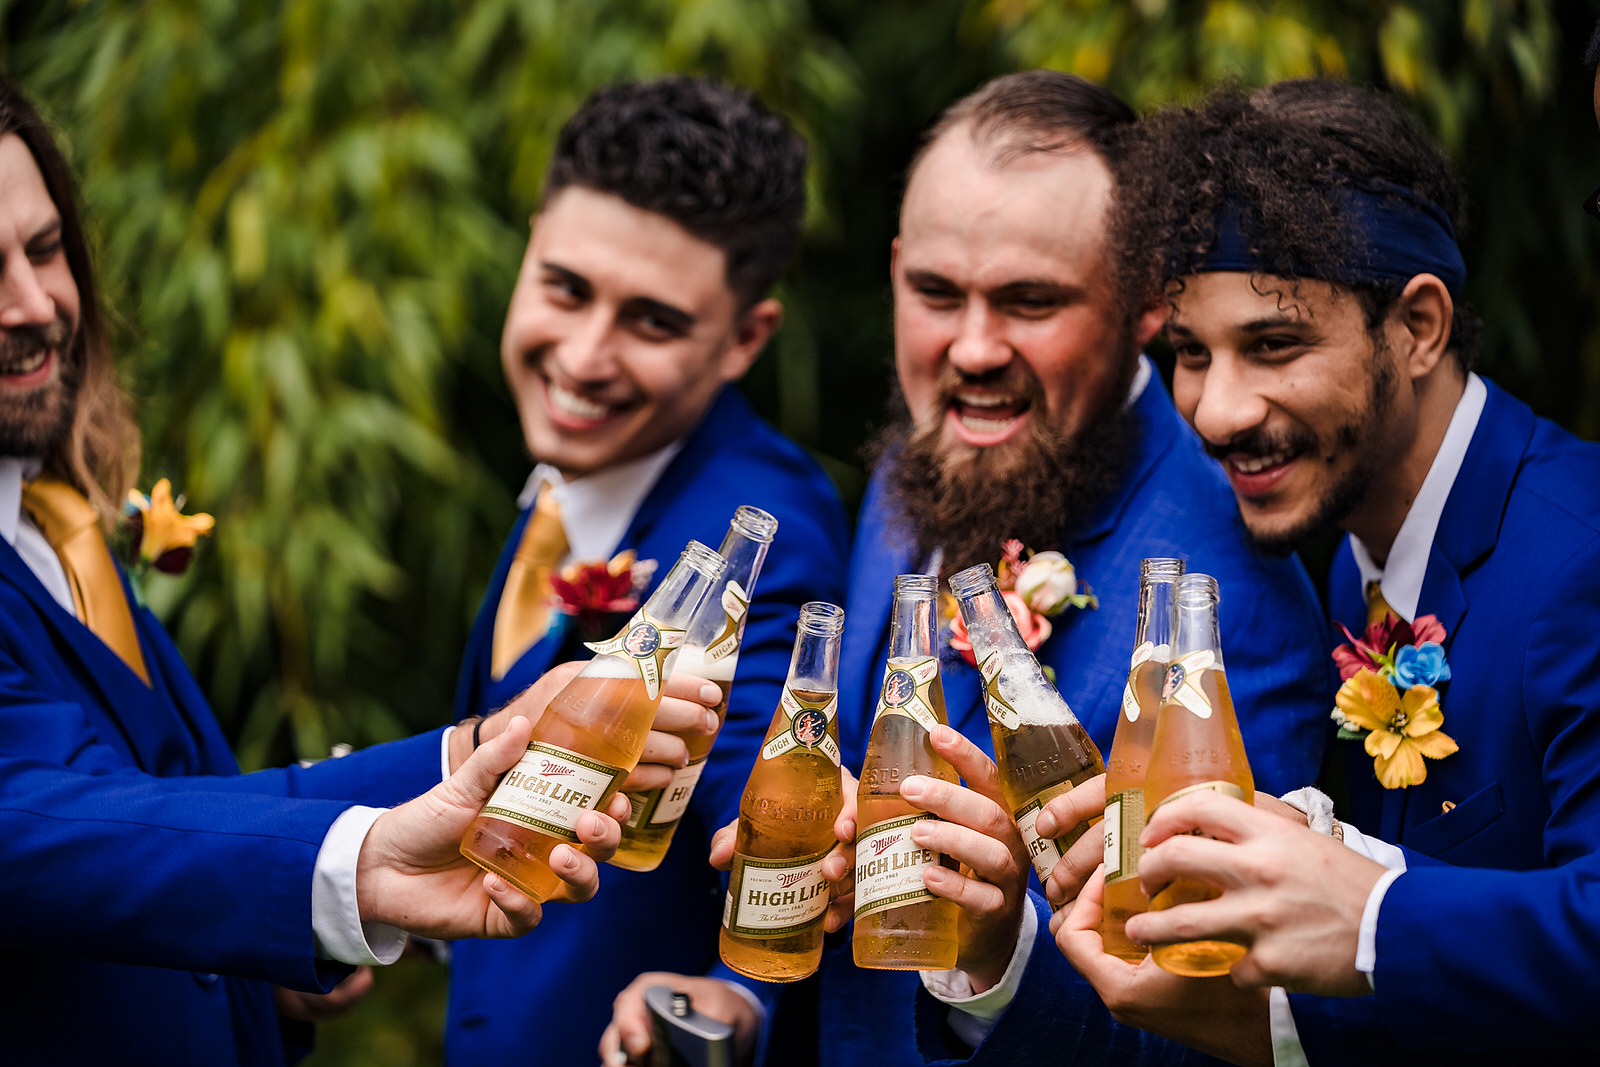 Groomsmen "champagne" toast with Miller High Life, the Champagne of beers